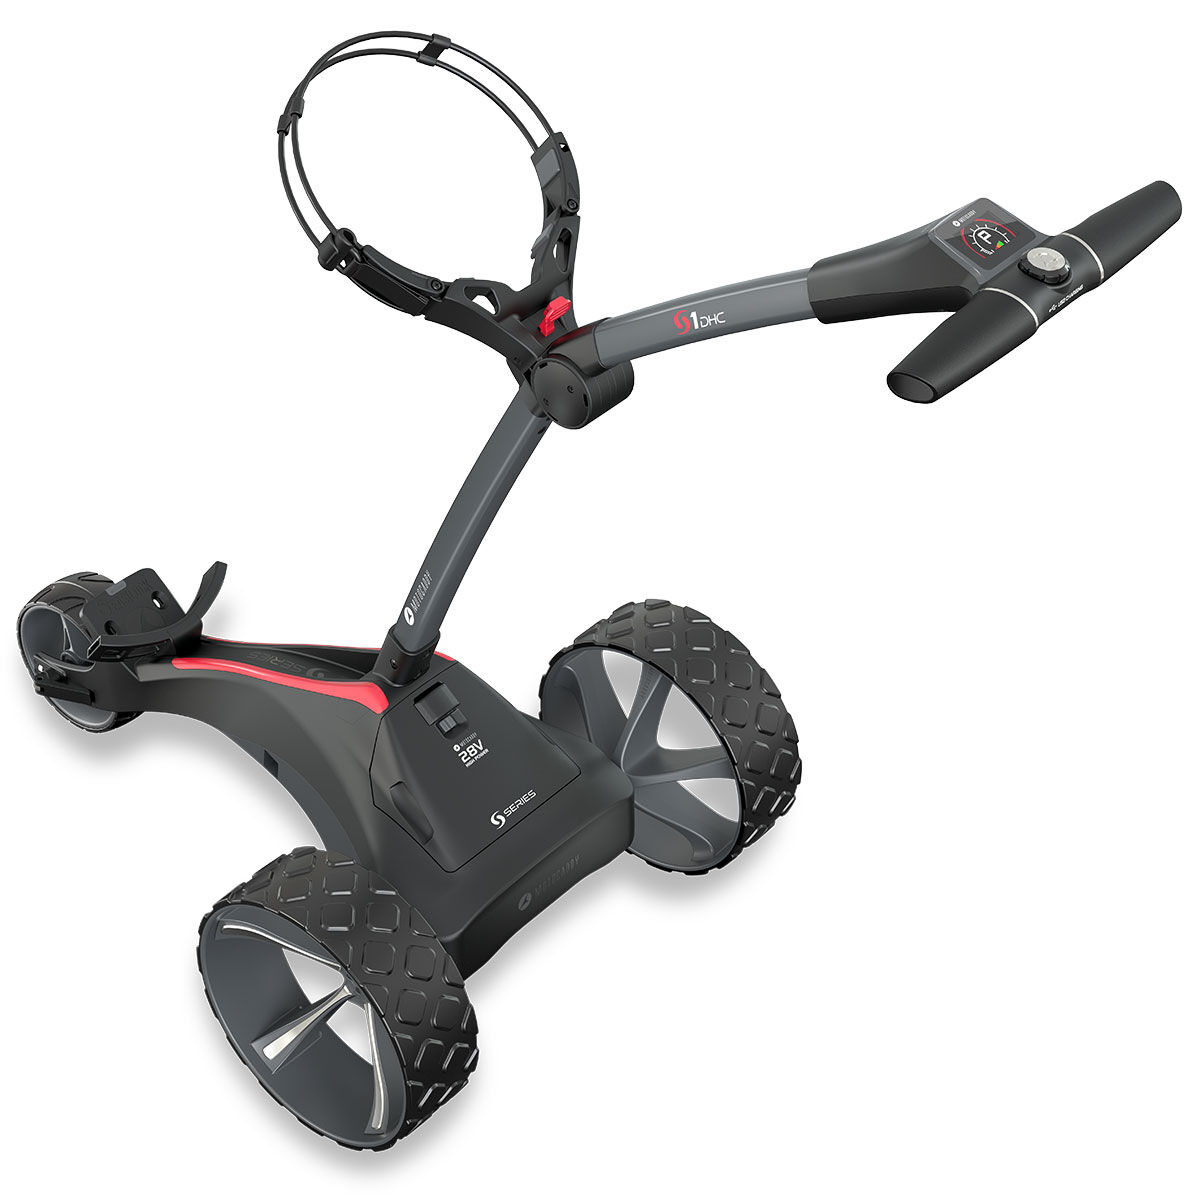 Motocaddy S1 DHC Extended Range Lithium Electric Golf Trolley, Graphite, One Size | American Golf von Motocaddy